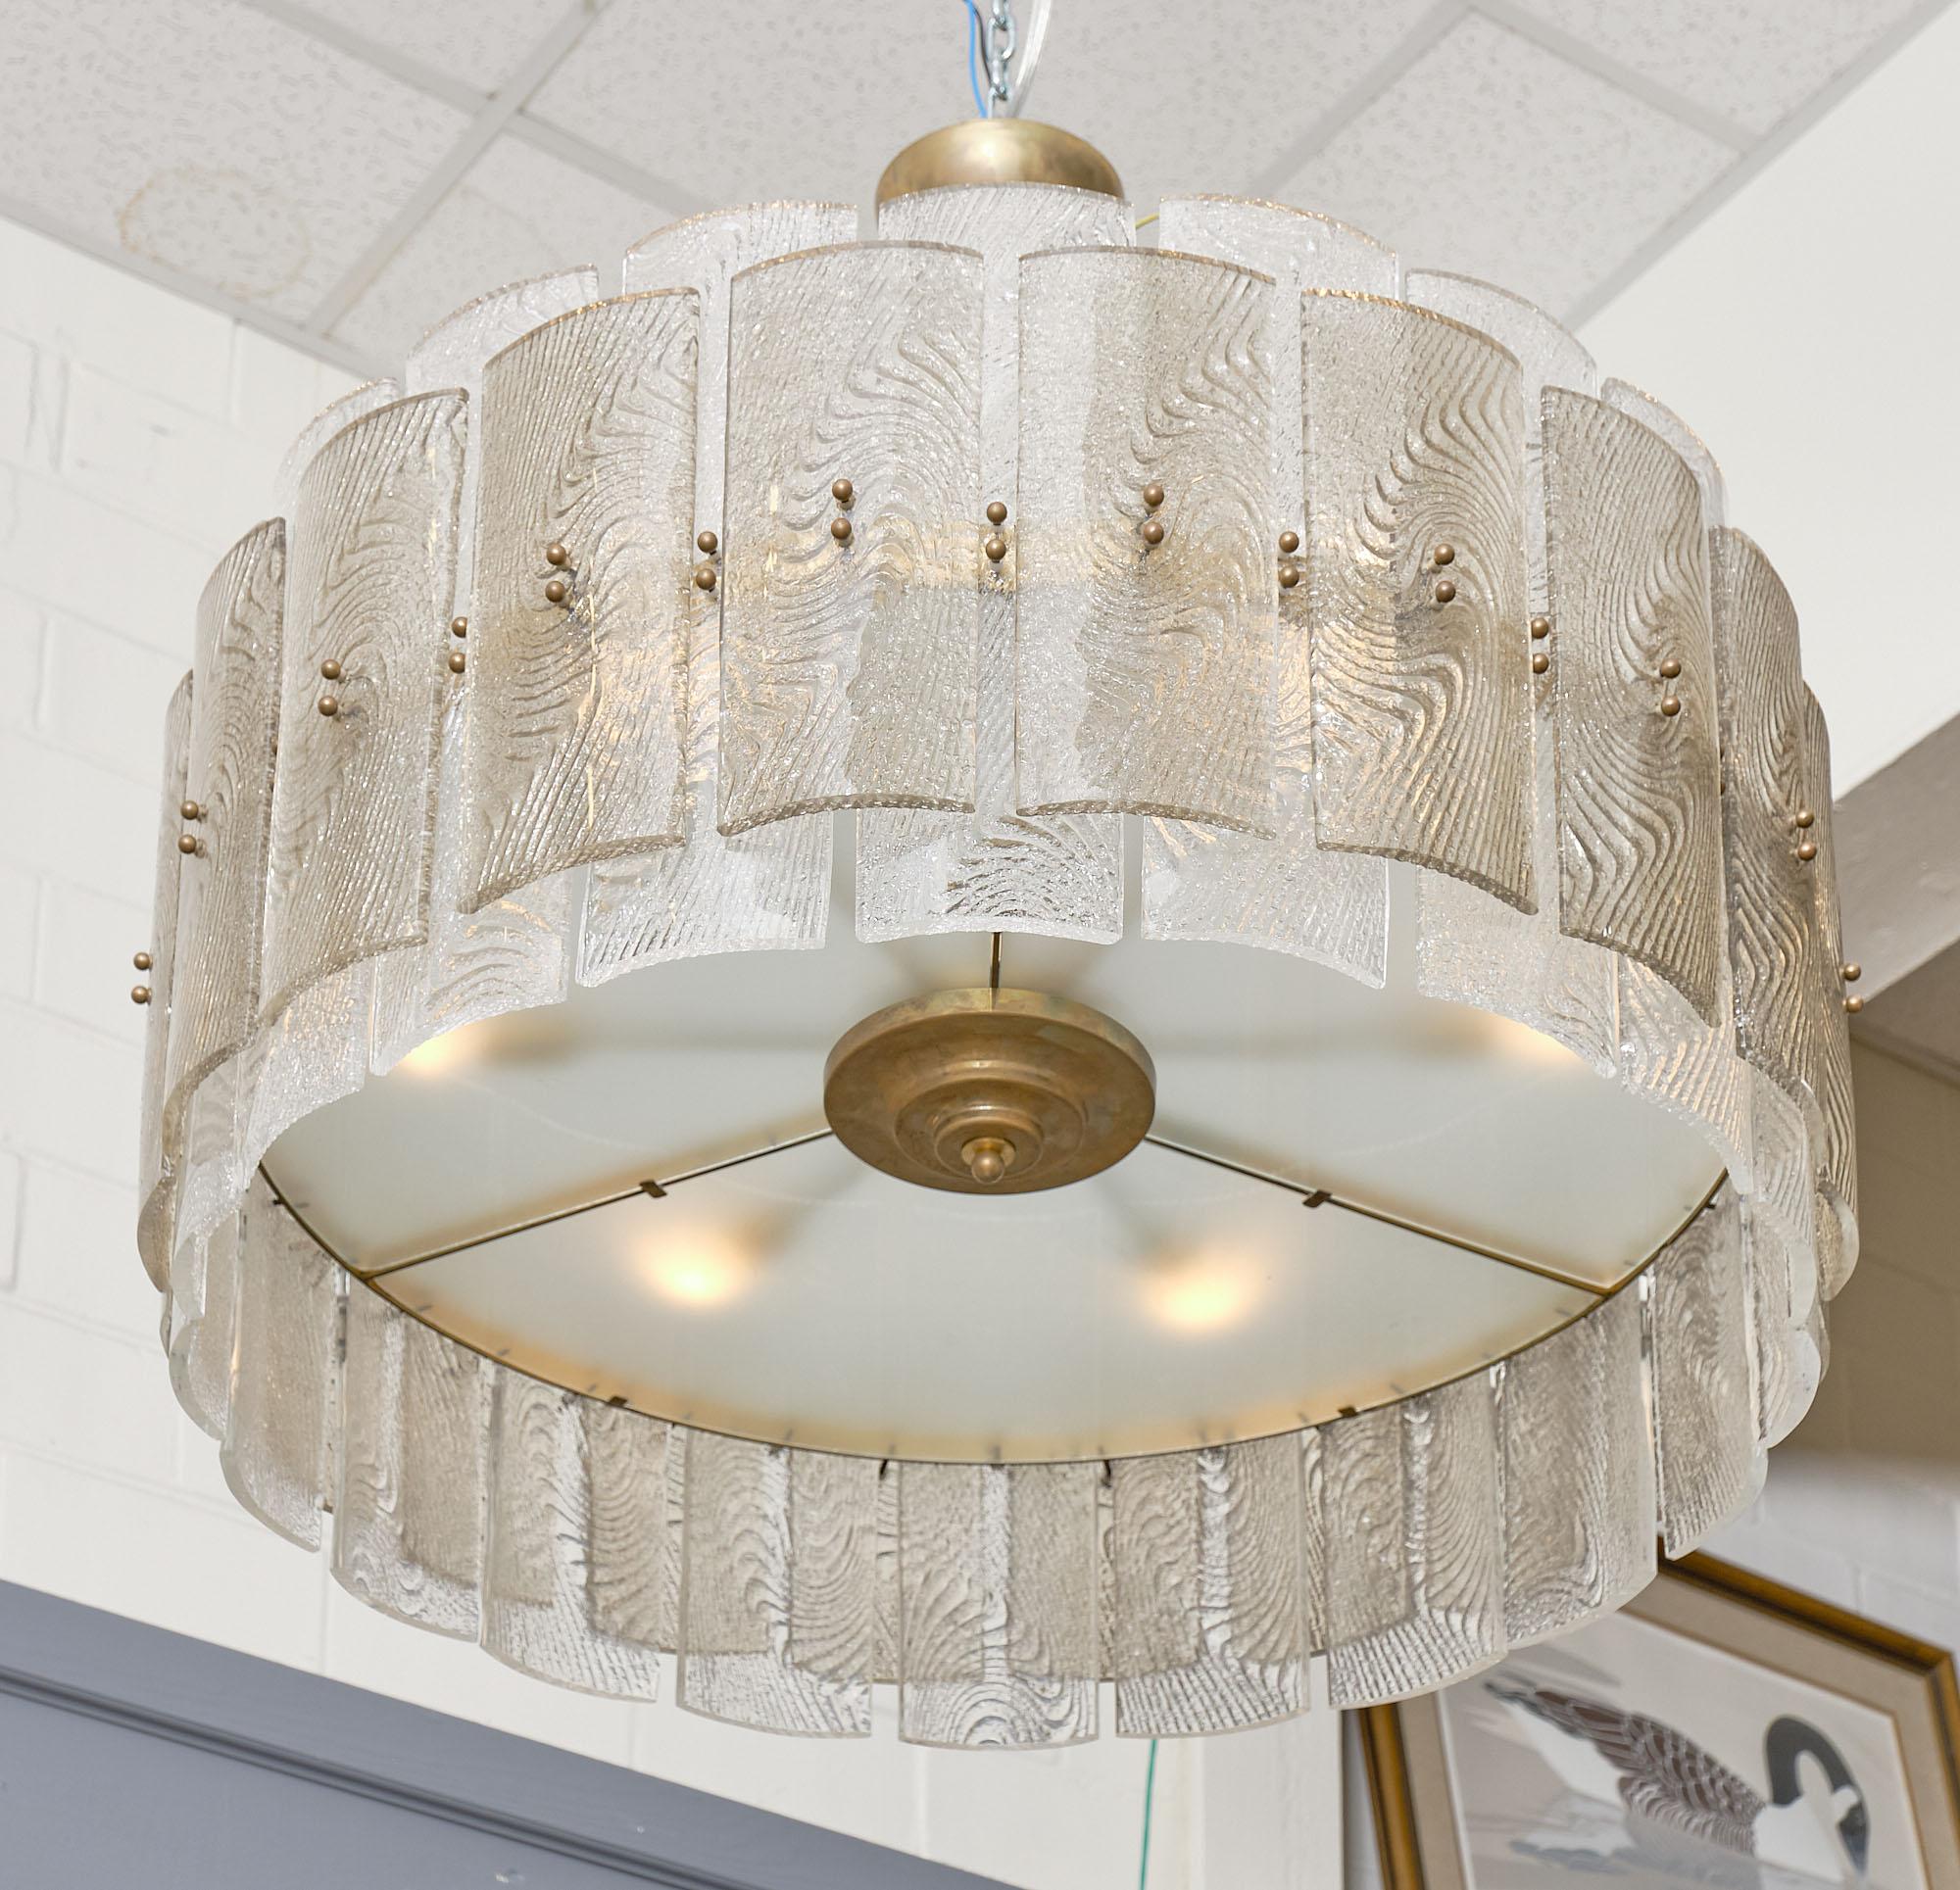 Chandelier, Italian, from Murano with hand-blown Corteccia glass in a drum shape. This fixture features multiple “piastre” attached to a brass structure. The glass slabs are textured and lightly tinted. It has been rewired to US standards. The